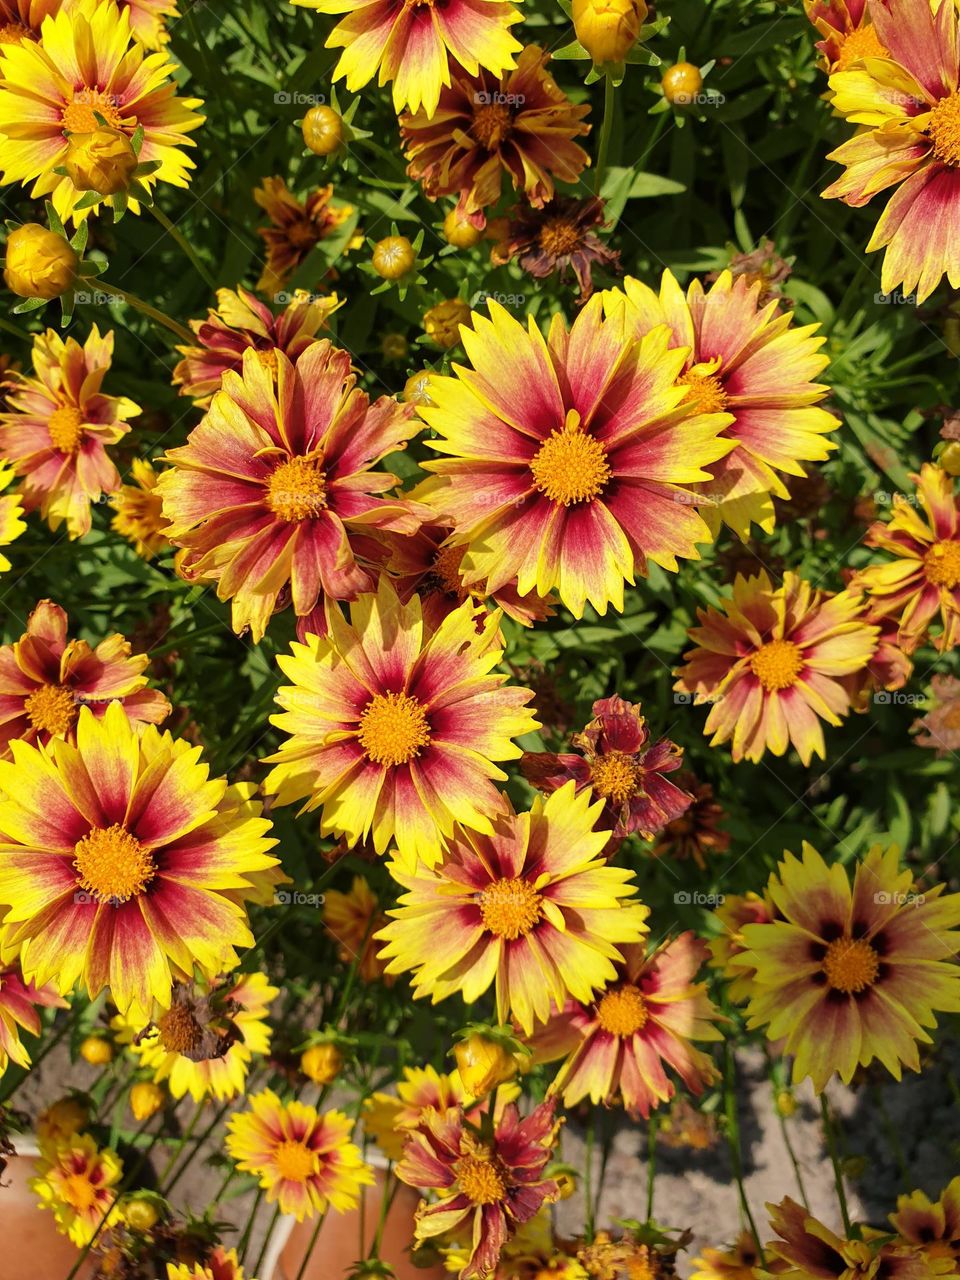 a portrait of multiple coreopsis or enchanted eve flowers during a sunny day.